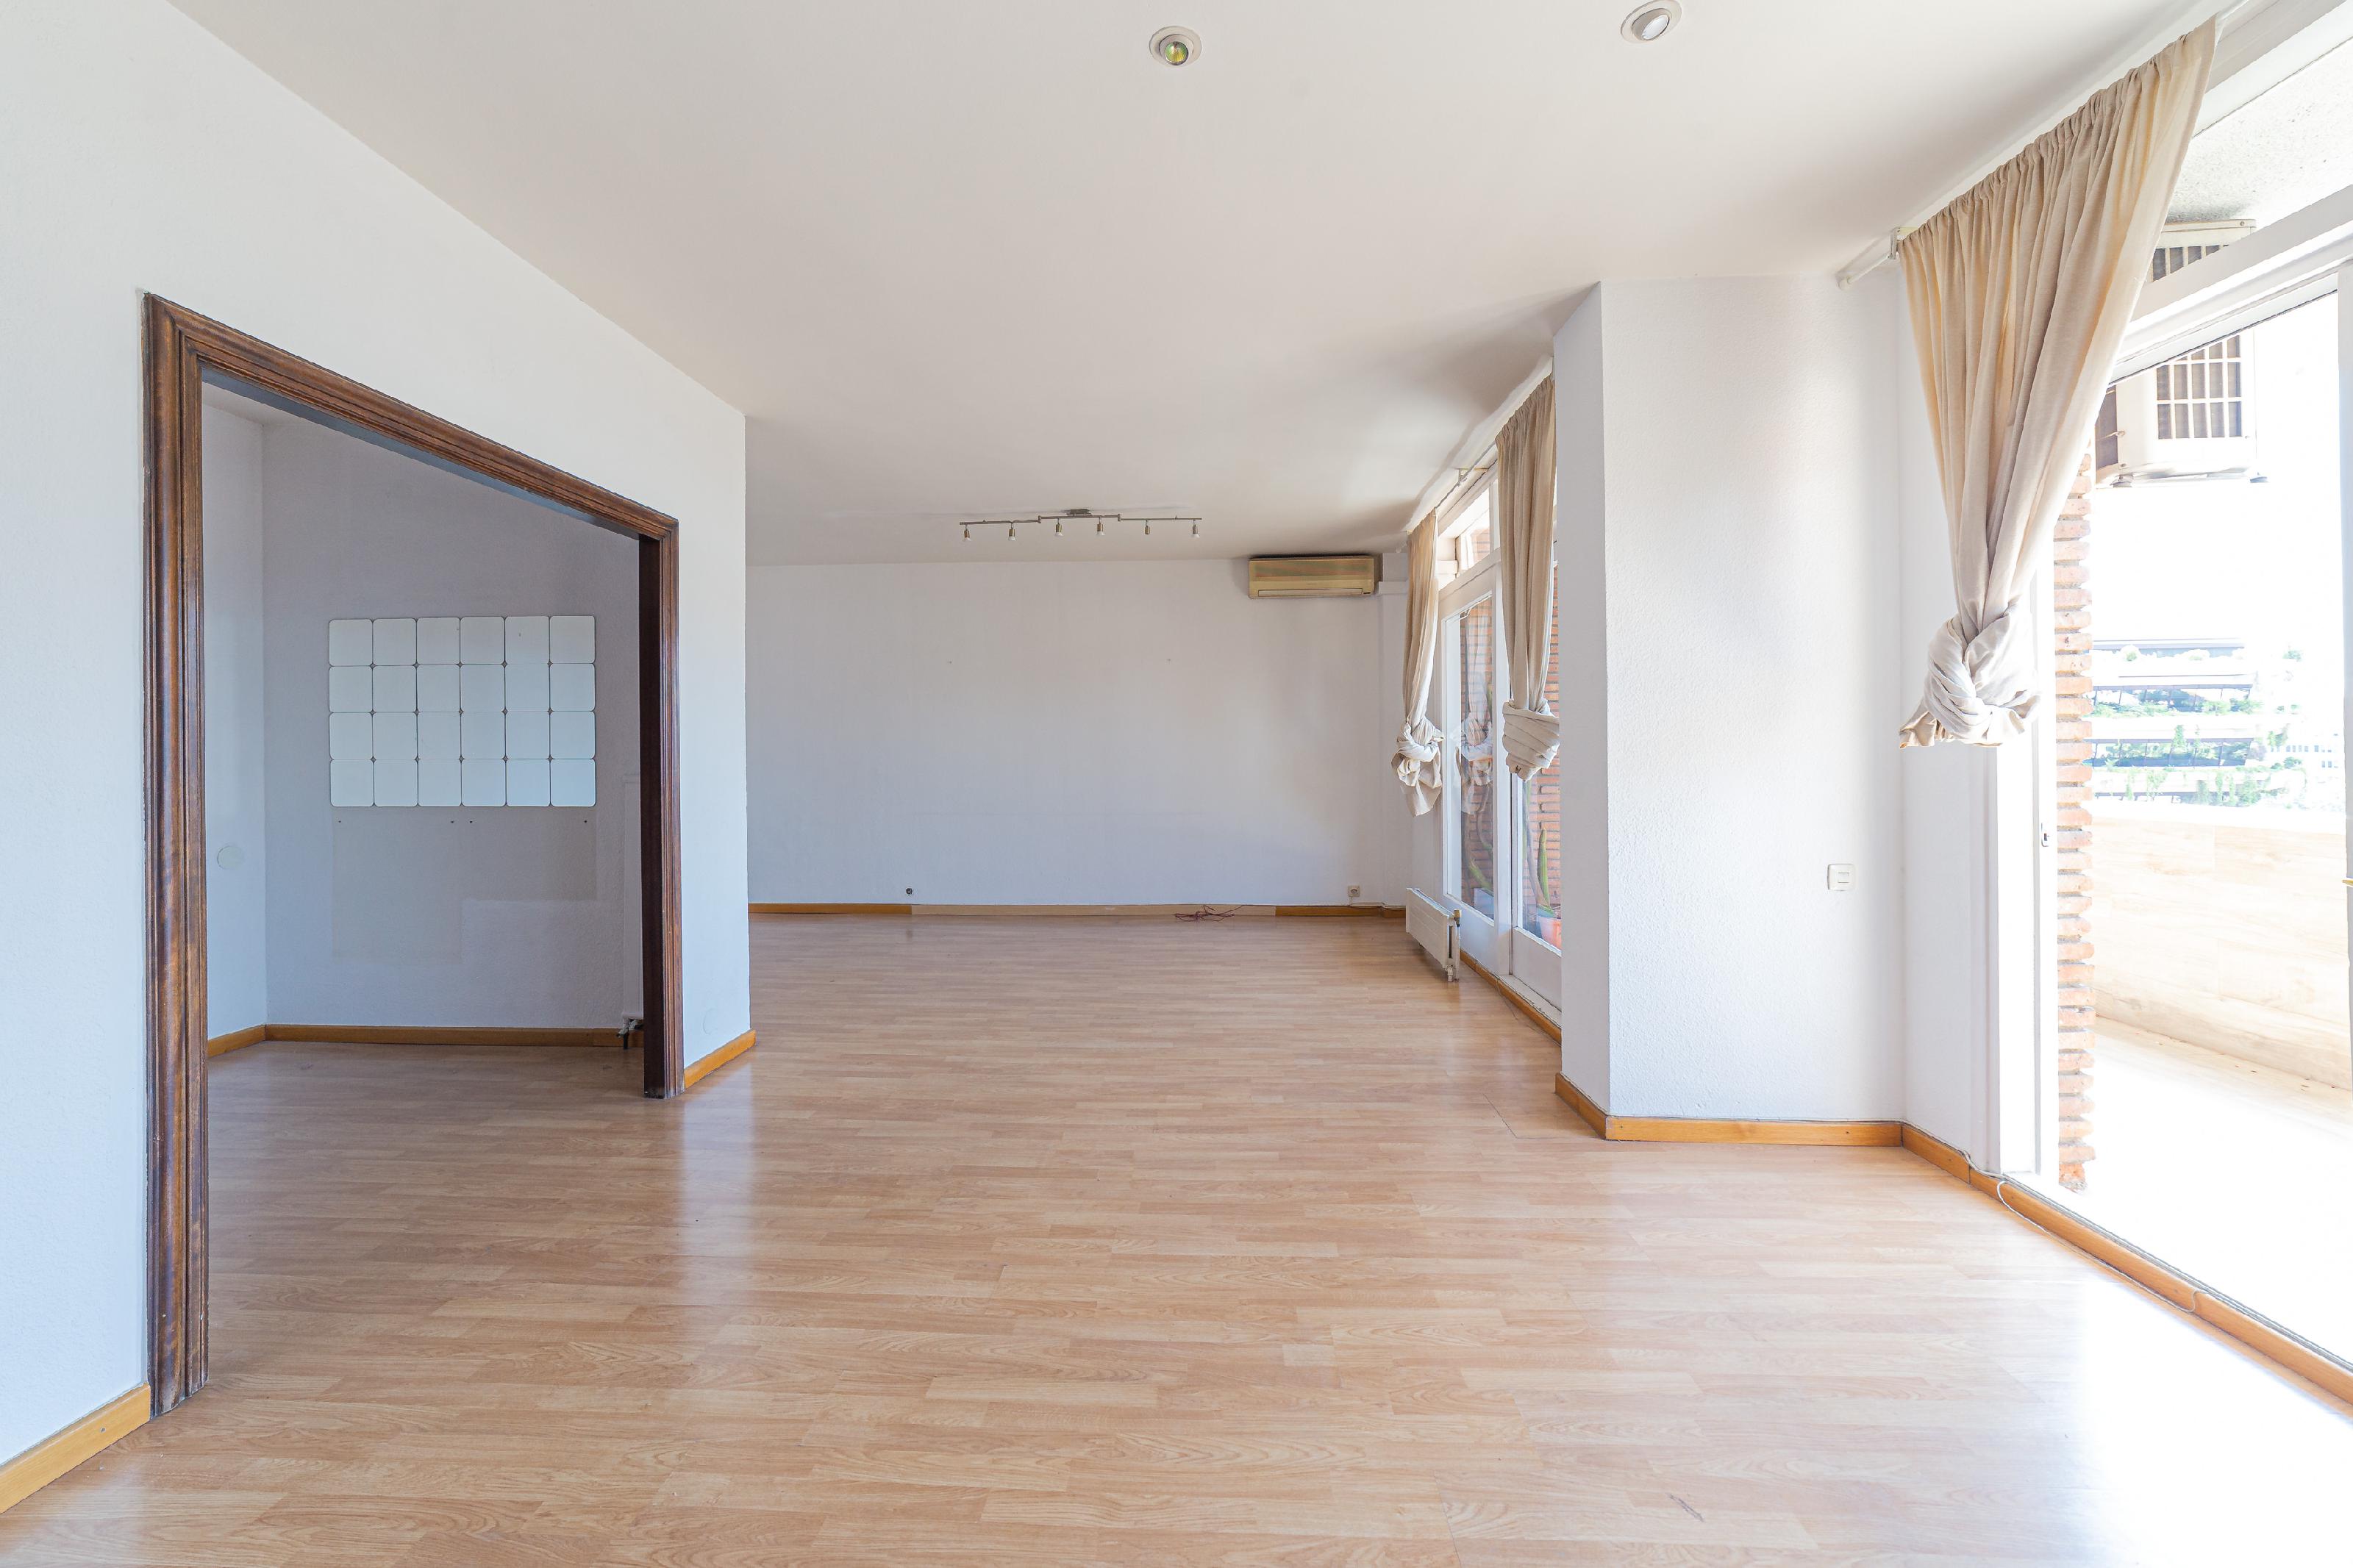 272927 Flat for sale in Les Corts, Pedralbes 7